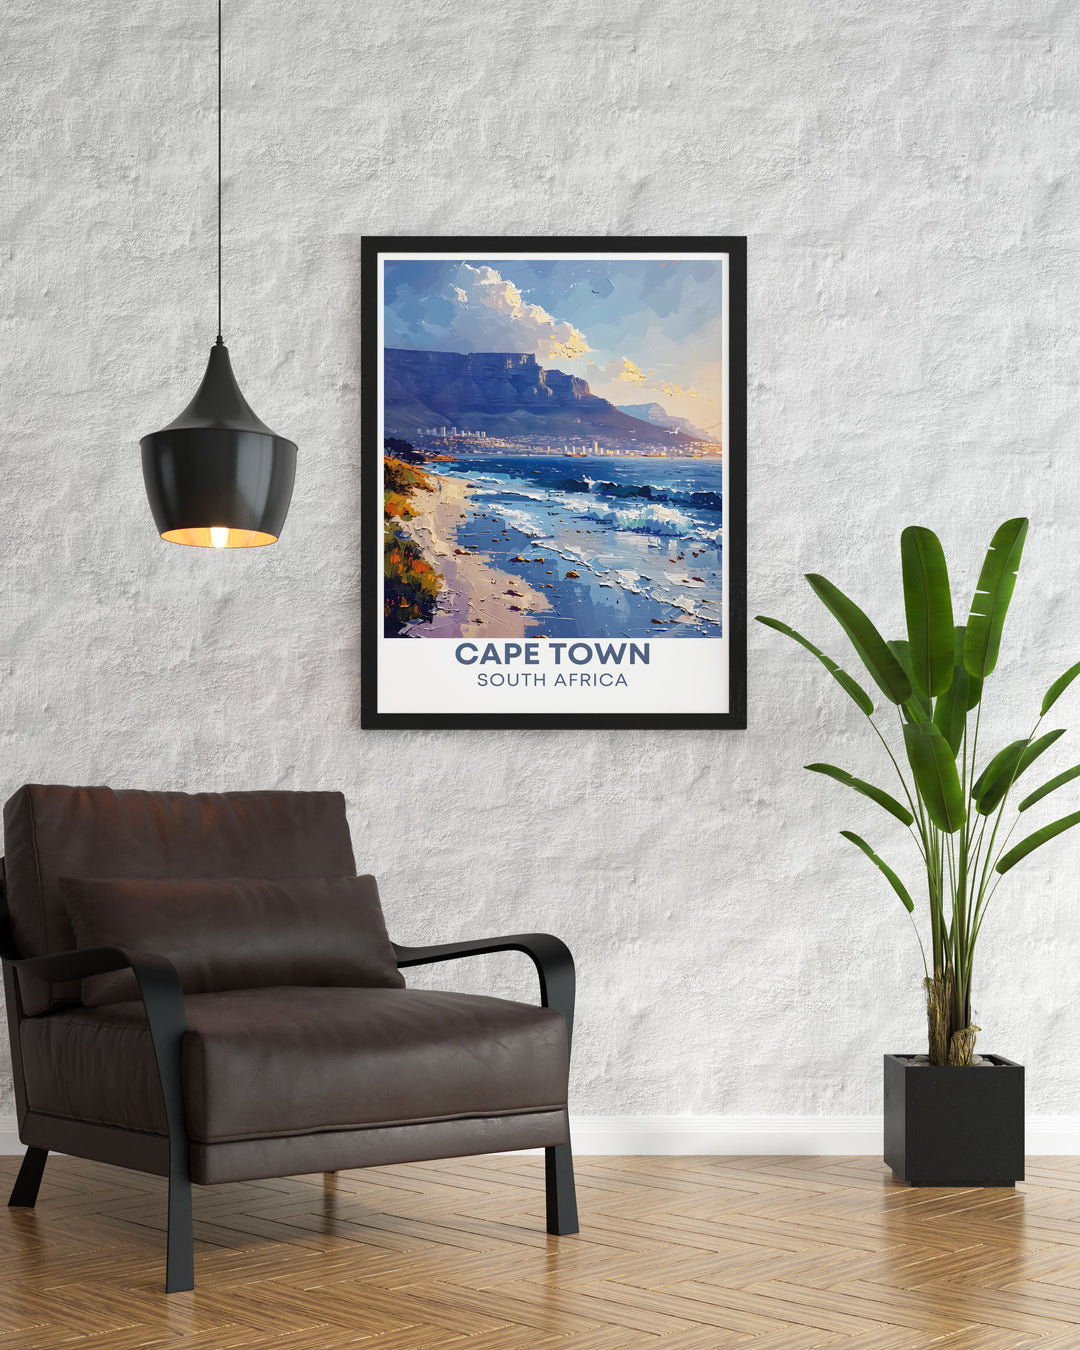 This poster artfully depicts Table Mountain and its role in Cape Towns skyline, offering a perfect blend of scenic landscapes and urban landmarks for your decor.